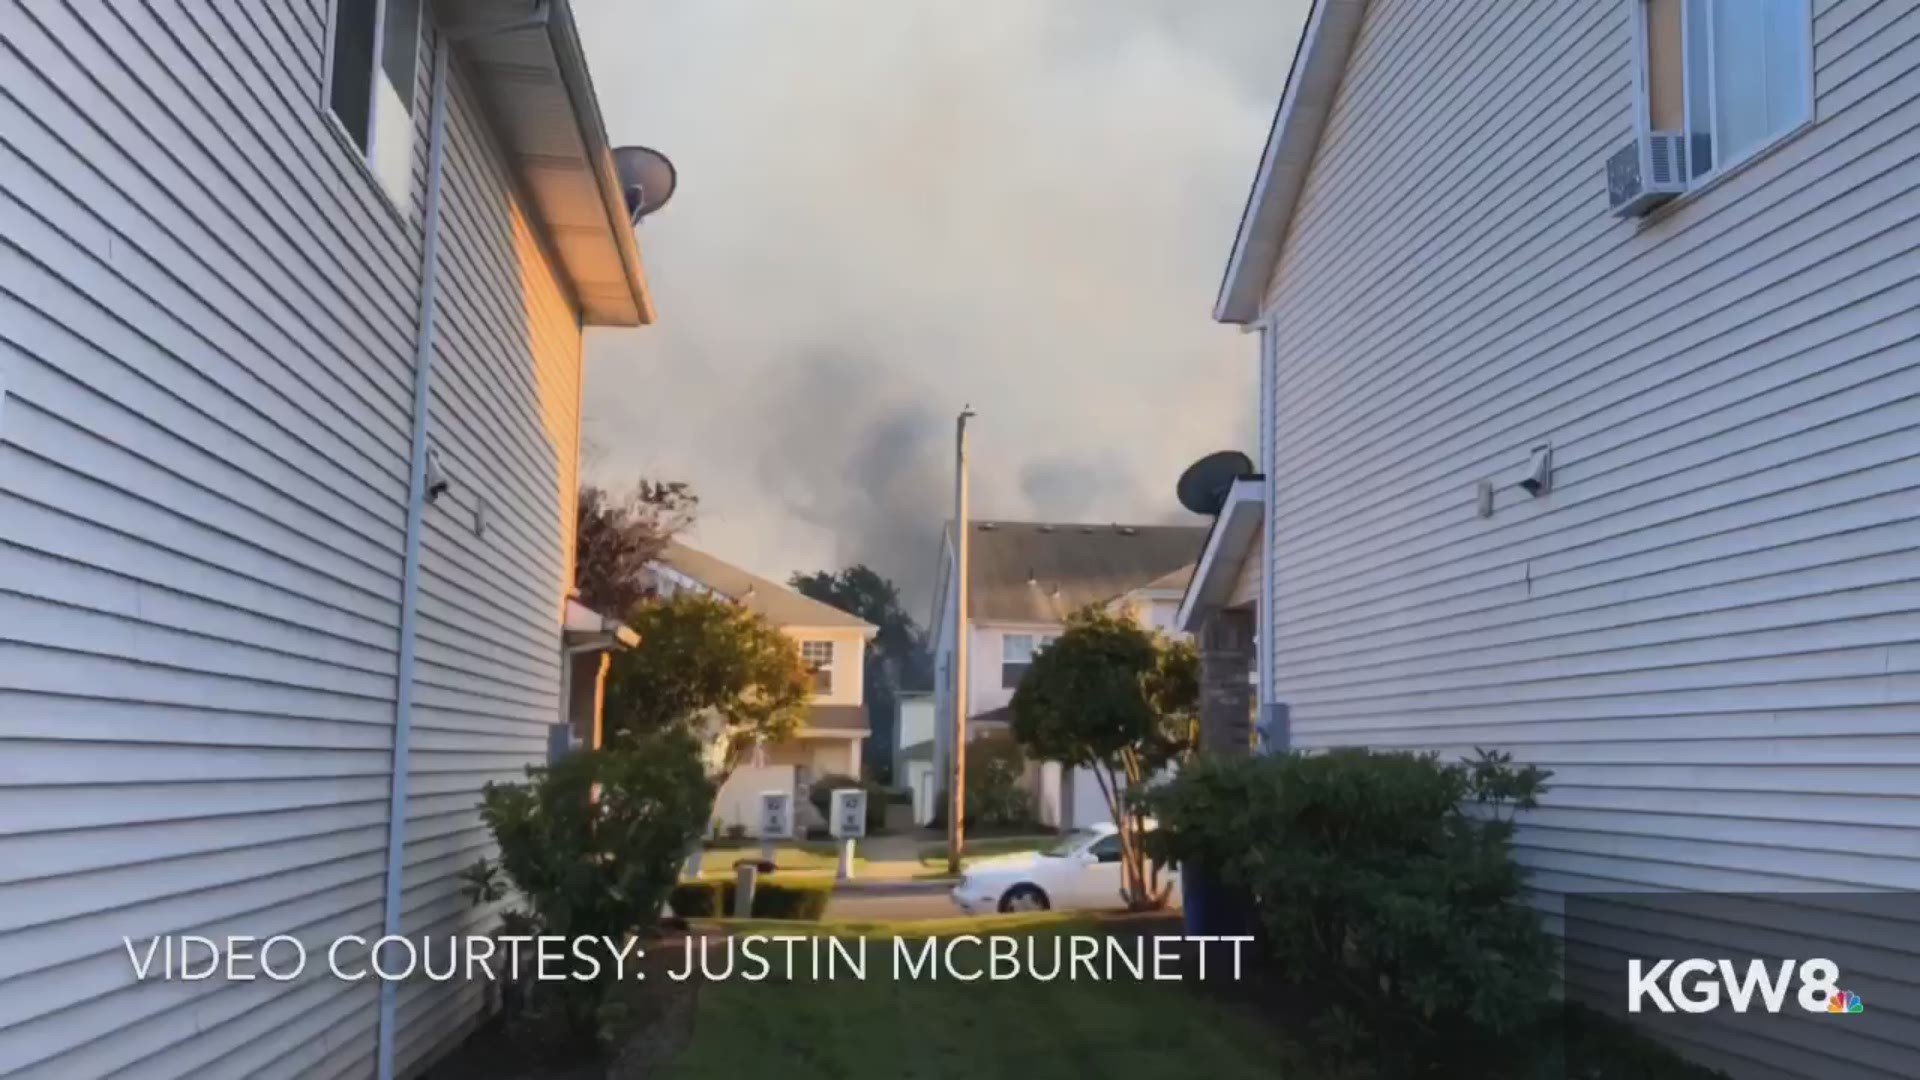 A video given to KGW by Justin McBurnett shows him battling the 5 alarm NE Portland fire with his garden hose as he awaited firefighter response.